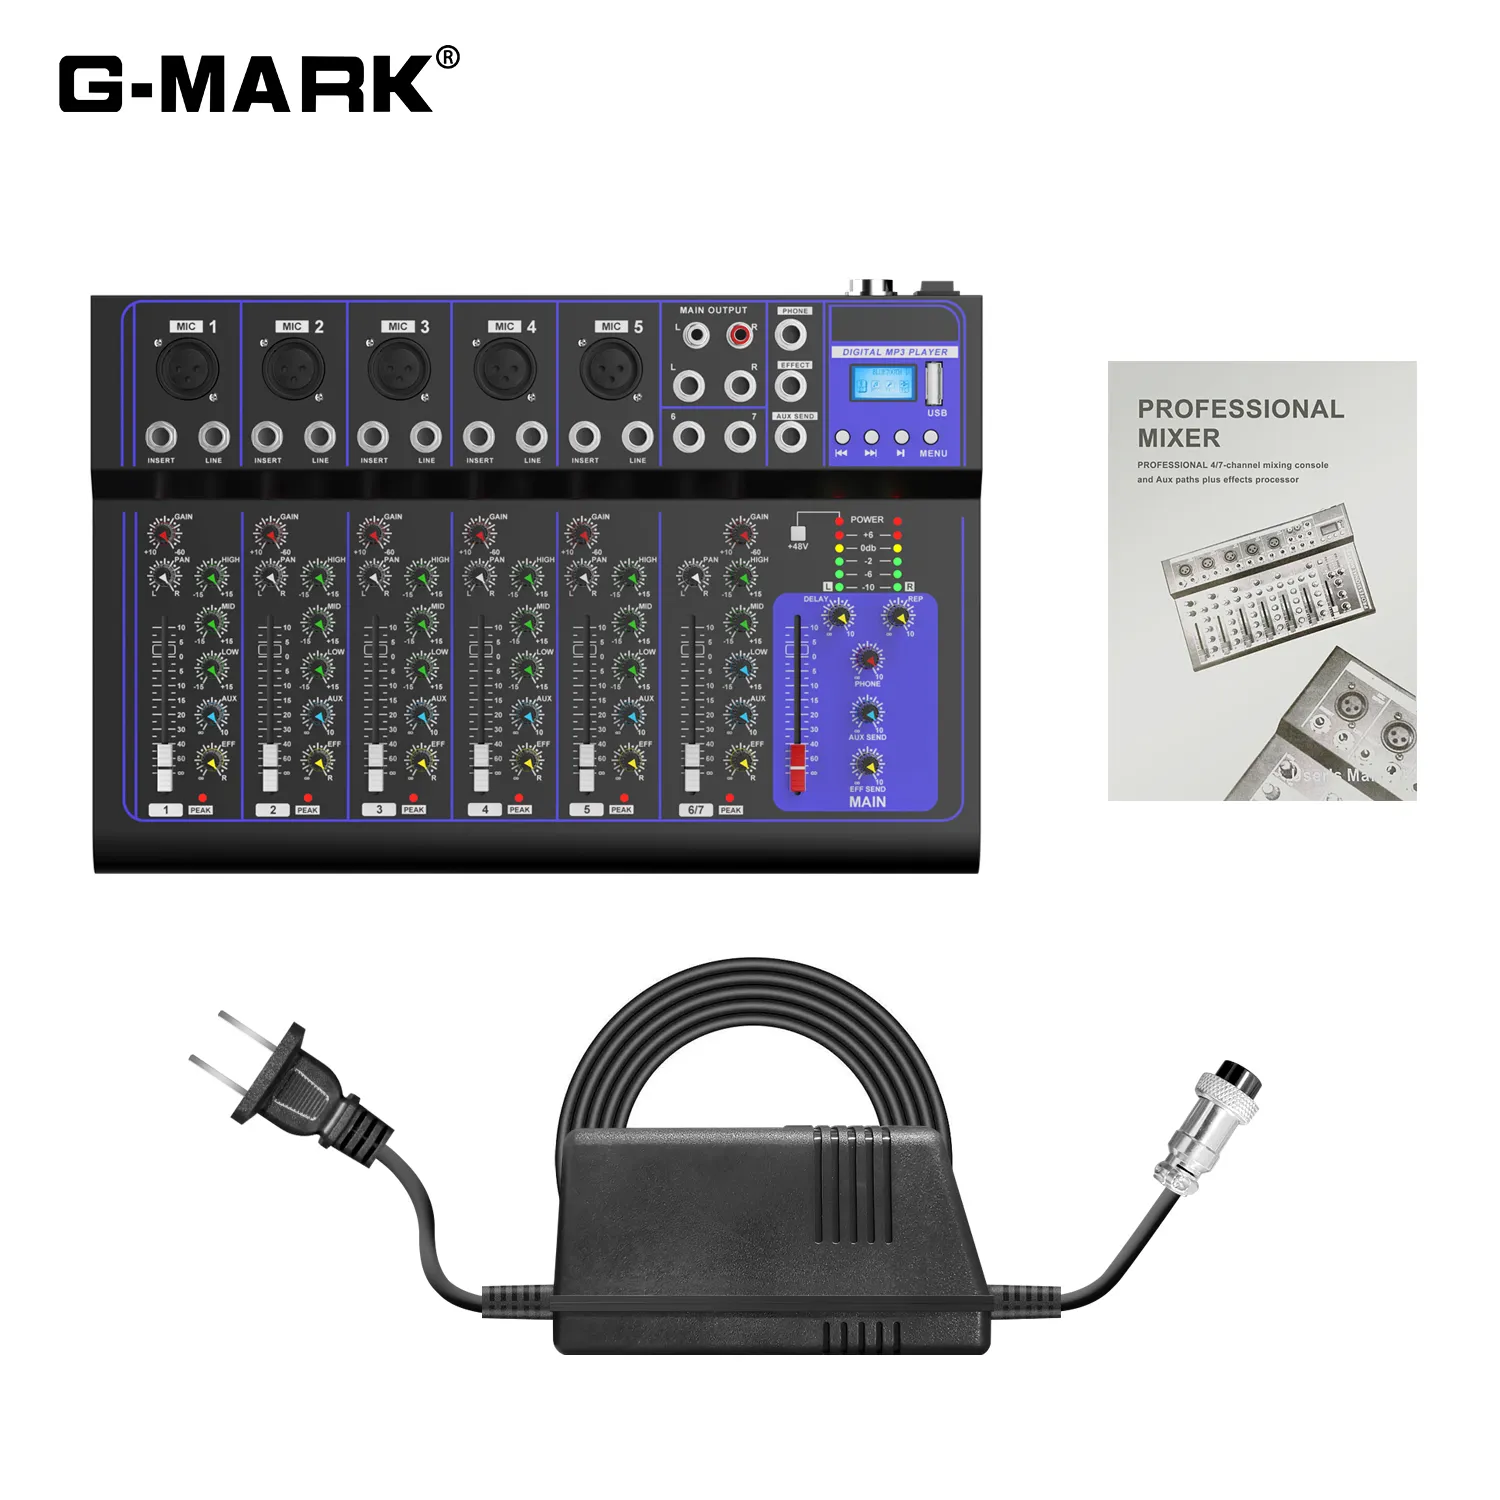 G-MARK F4/F7 Bluetooth Portable Audio Mixer 4/7-Channel DJ Sound Mixing Console Built-in USB MP3 Jack 48V Power for Studio, PC Recording, Stage, Bar Show